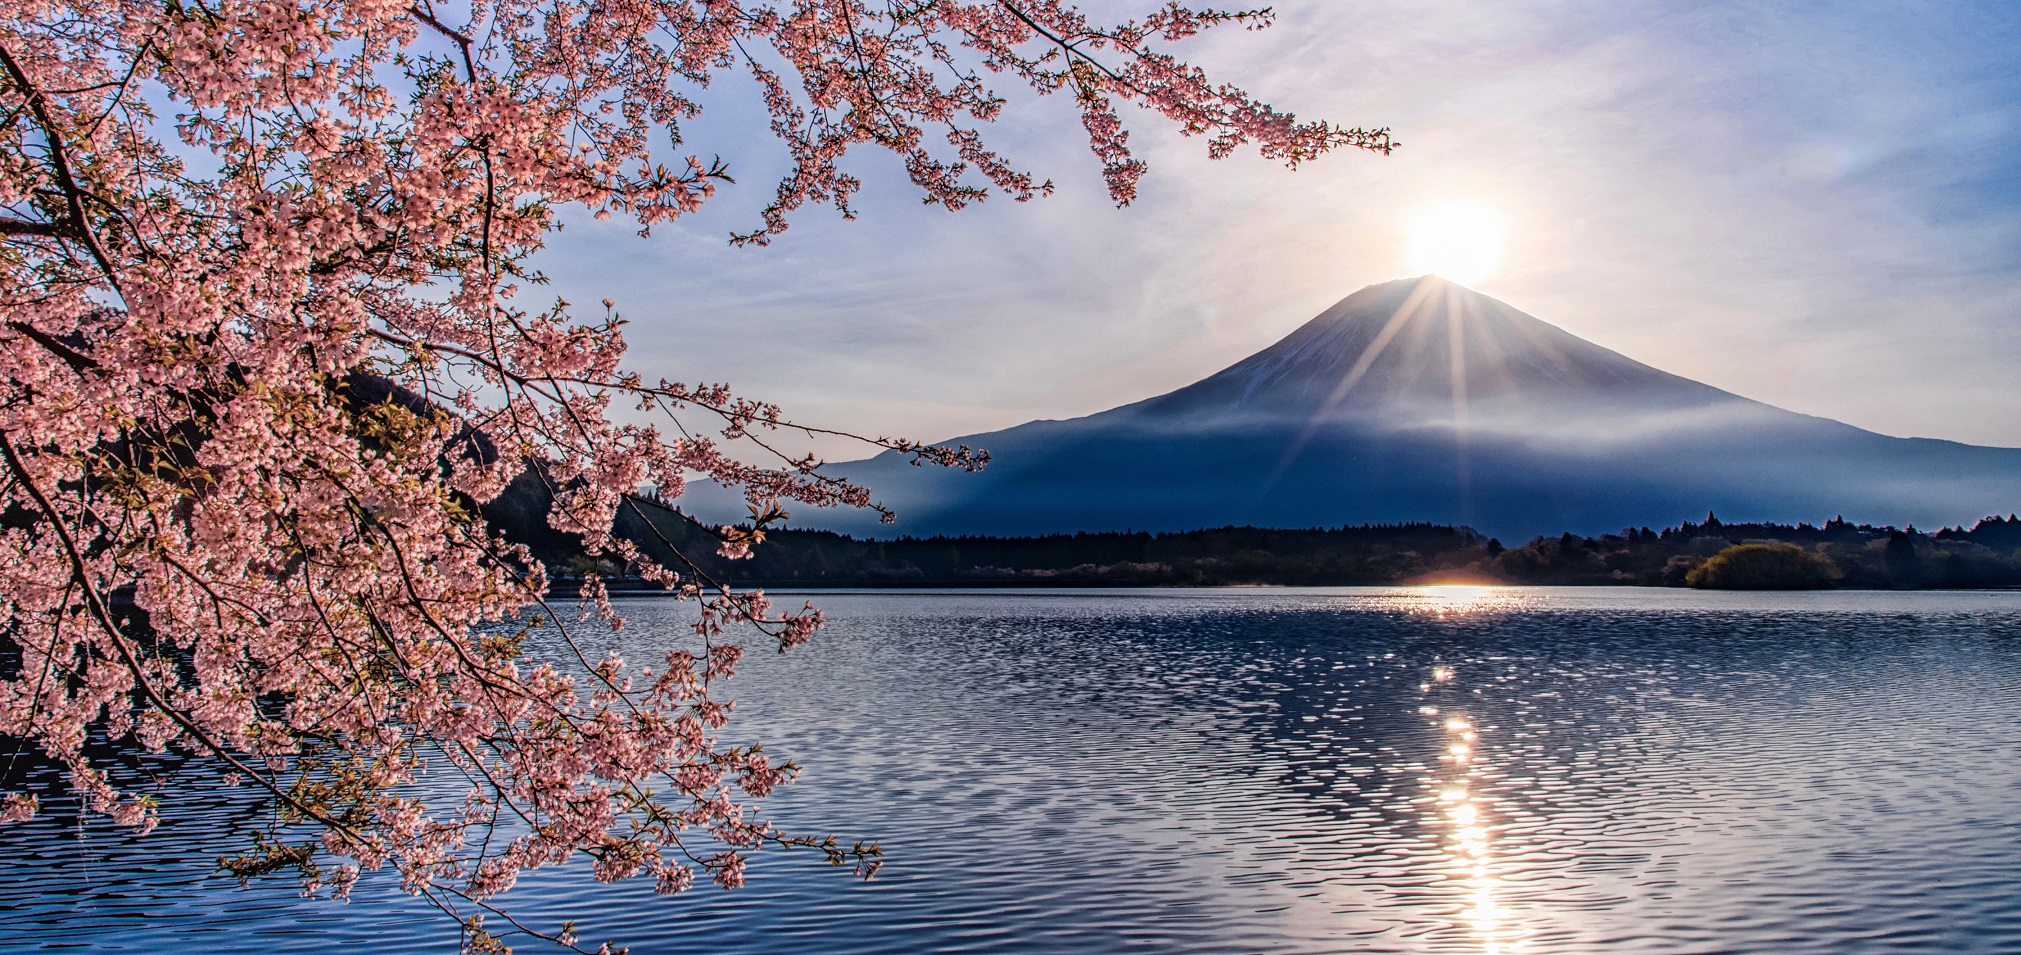 Experience extraordinary Japanese sights like this stunning view of Mount Fuji looming over a lake when you take a tailor-made holiday with Alfred&.